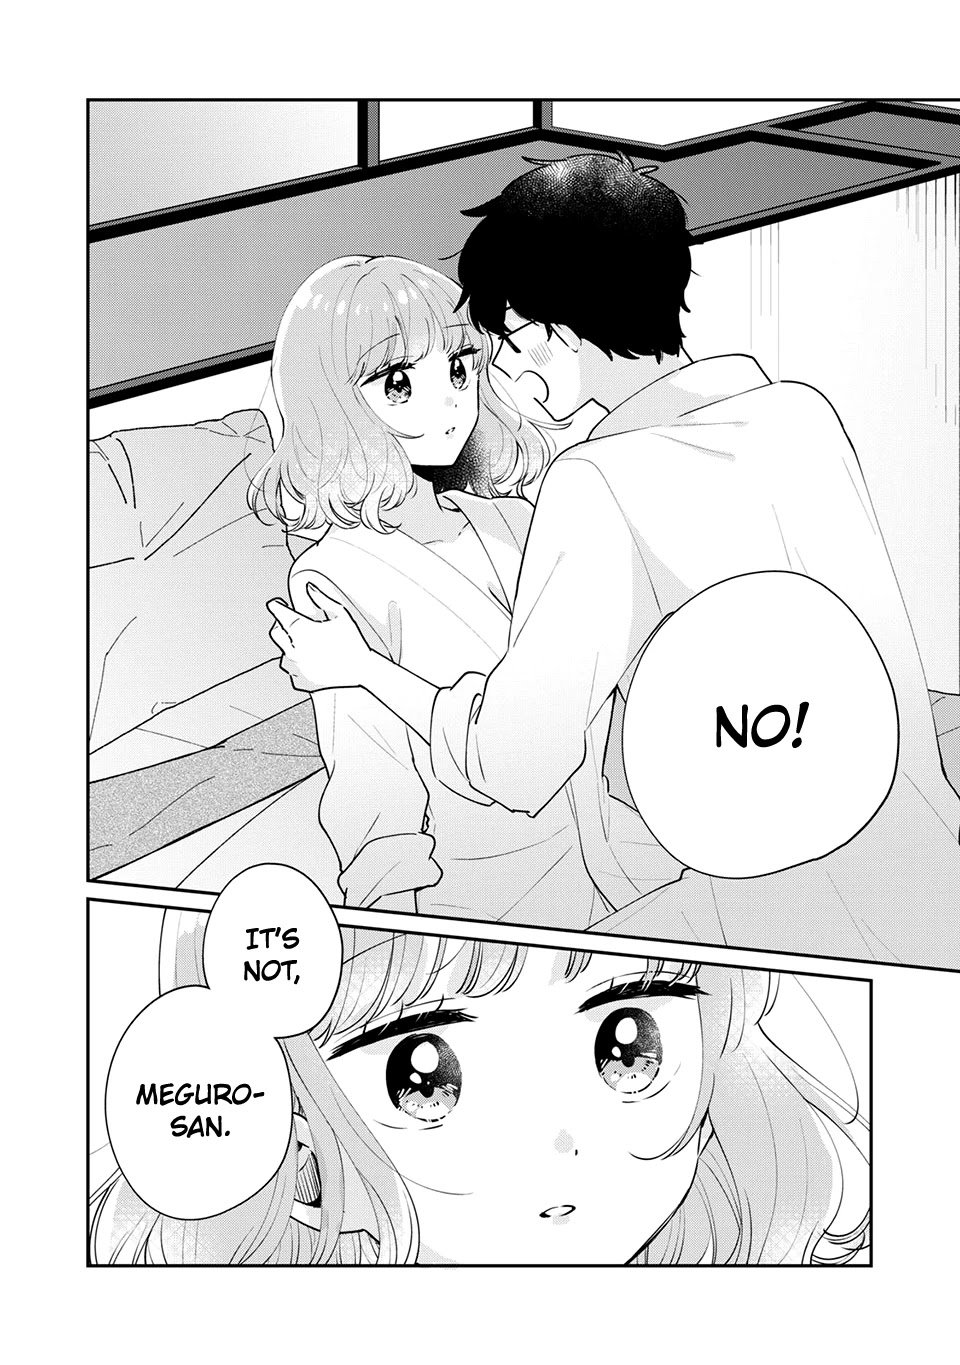 It's Not Meguro-san's First Time chapter 51 page 5